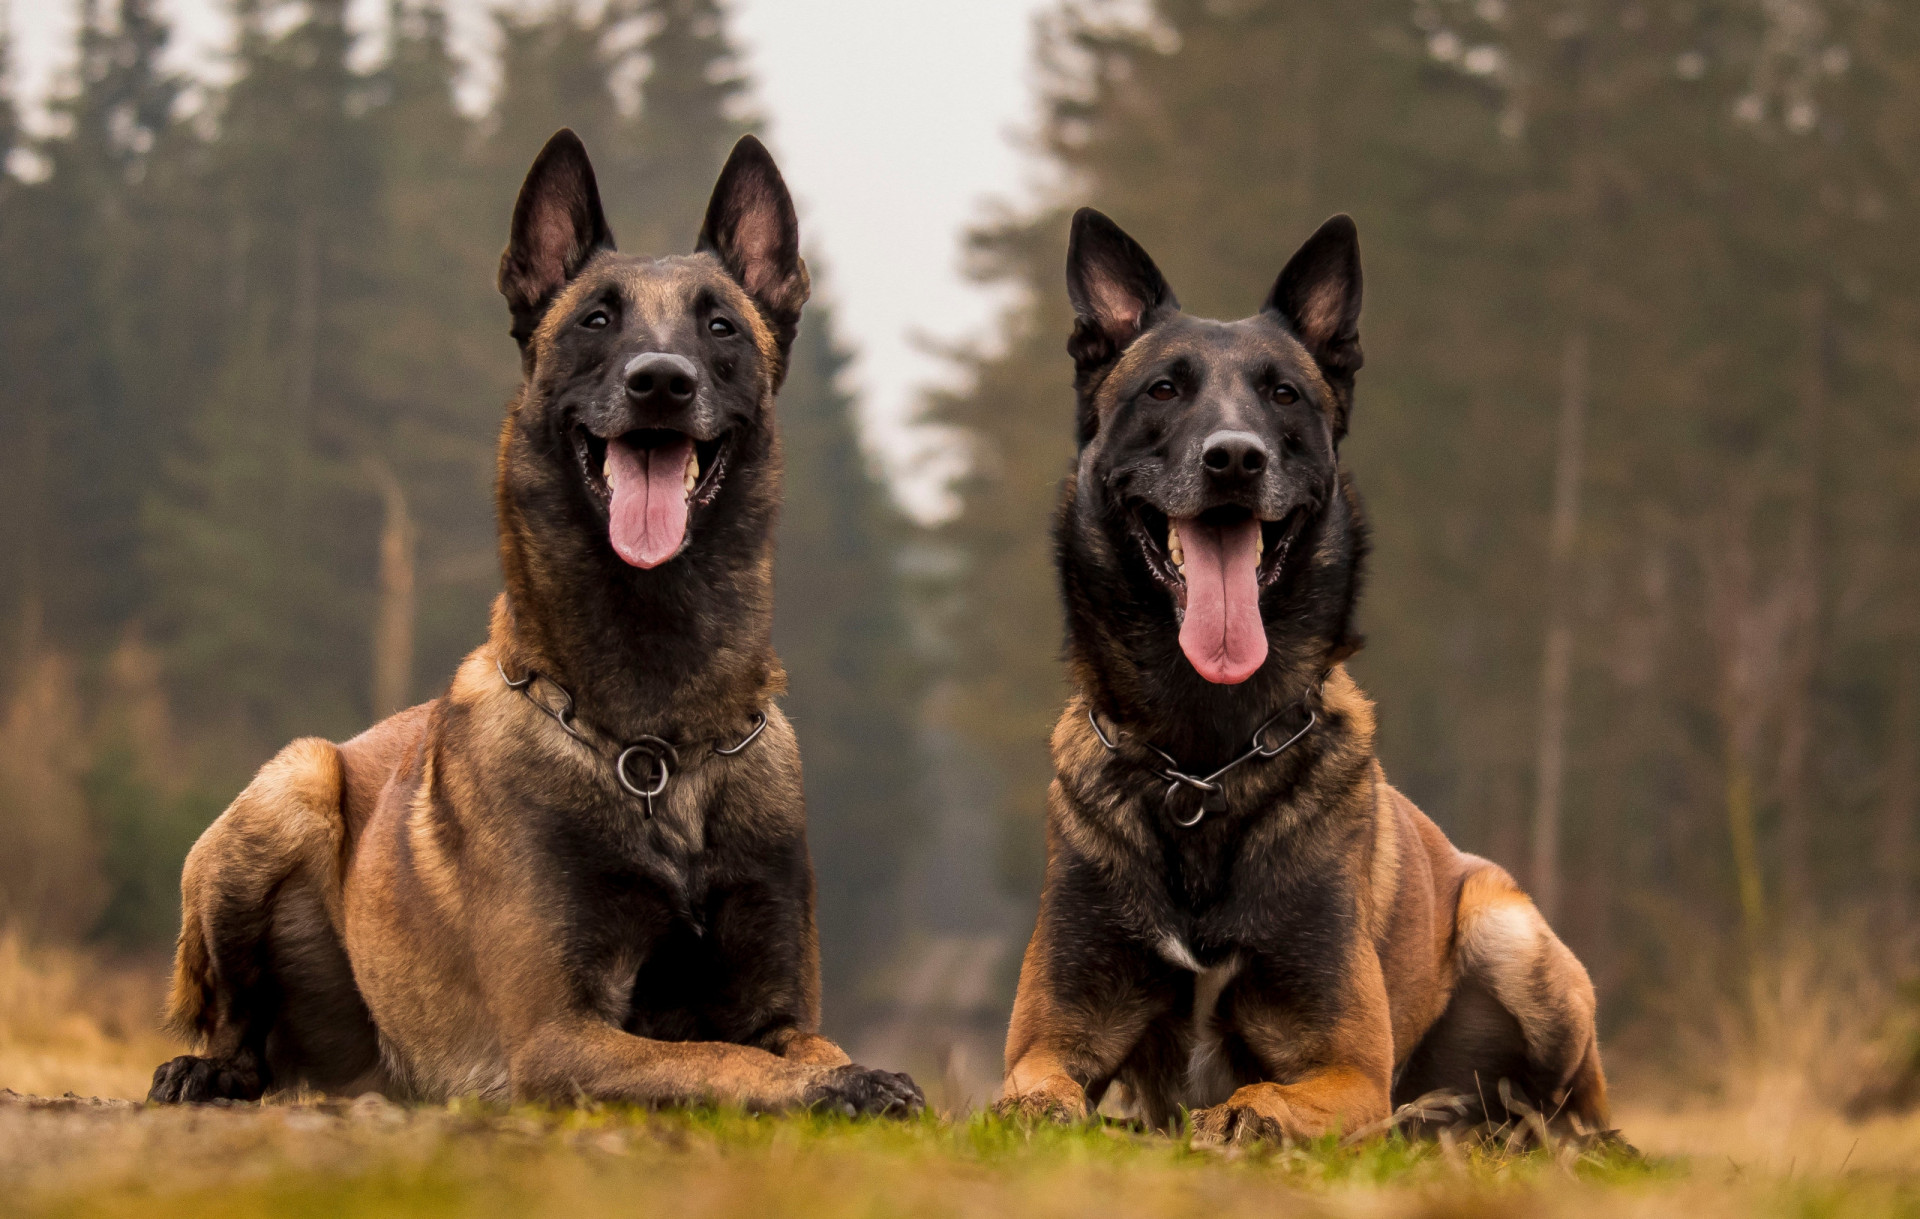 <p>Canines of this breed are very intelligent and easy to train. These dogs can reach 14 years old.</p><p><a href="https://www.msn.com/en-us/community/channel/vid-7xx8mnucu55yw63we9va2gwr7uihbxwc68fxqp25x6tg4ftibpra?cvid=94631541bc0f4f89bfd59158d696ad7e">Follow us and access great exclusive content every day</a></p>